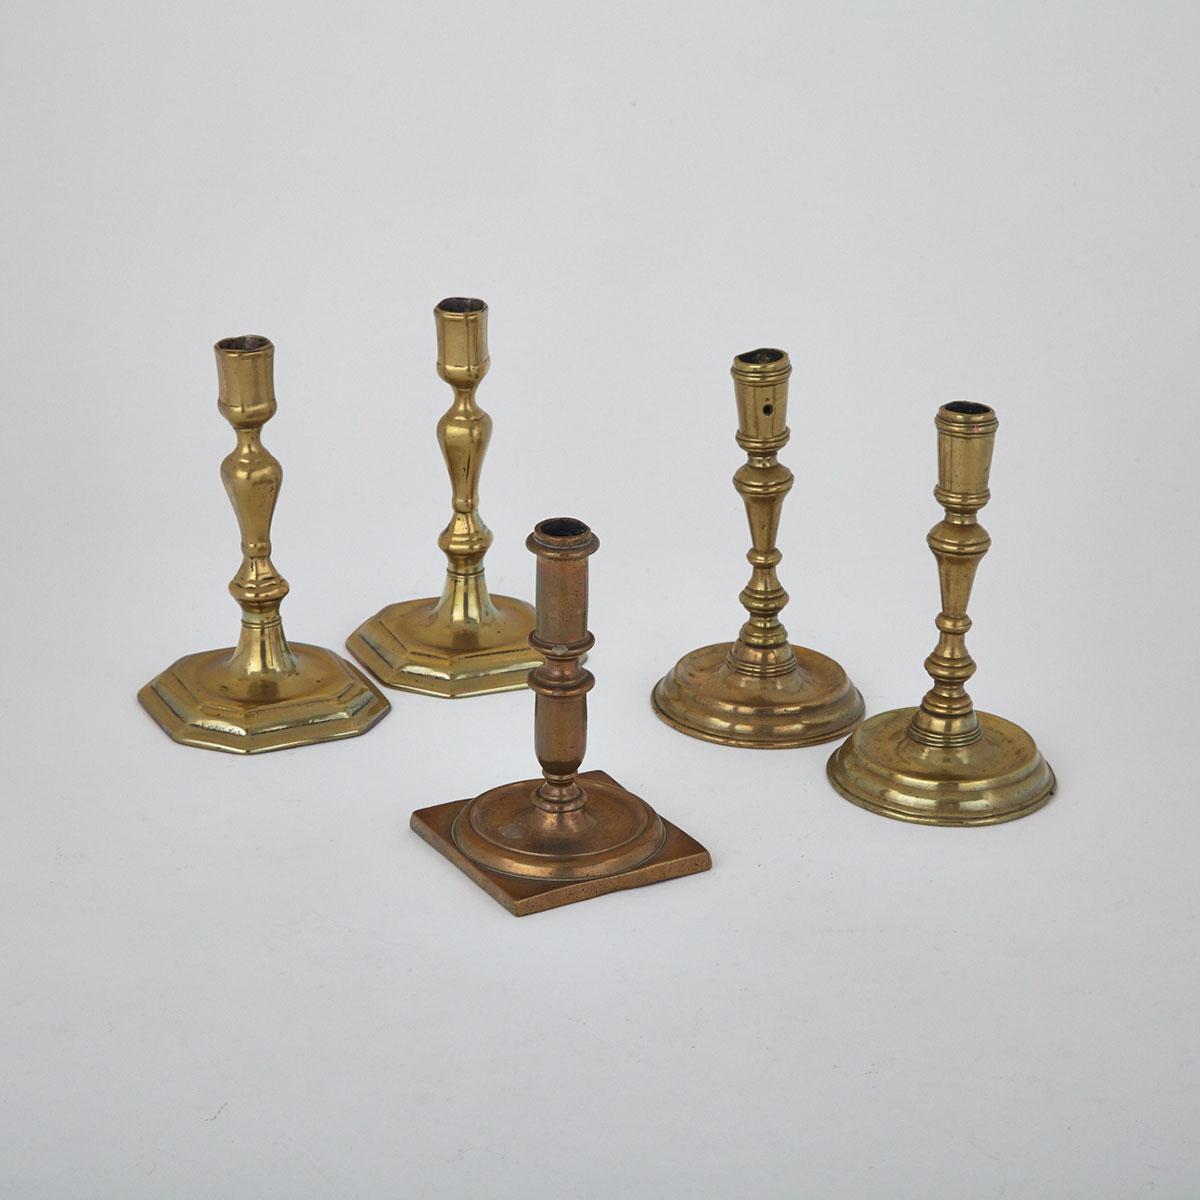 Group of Five Brass Candlesticks, early 18th century